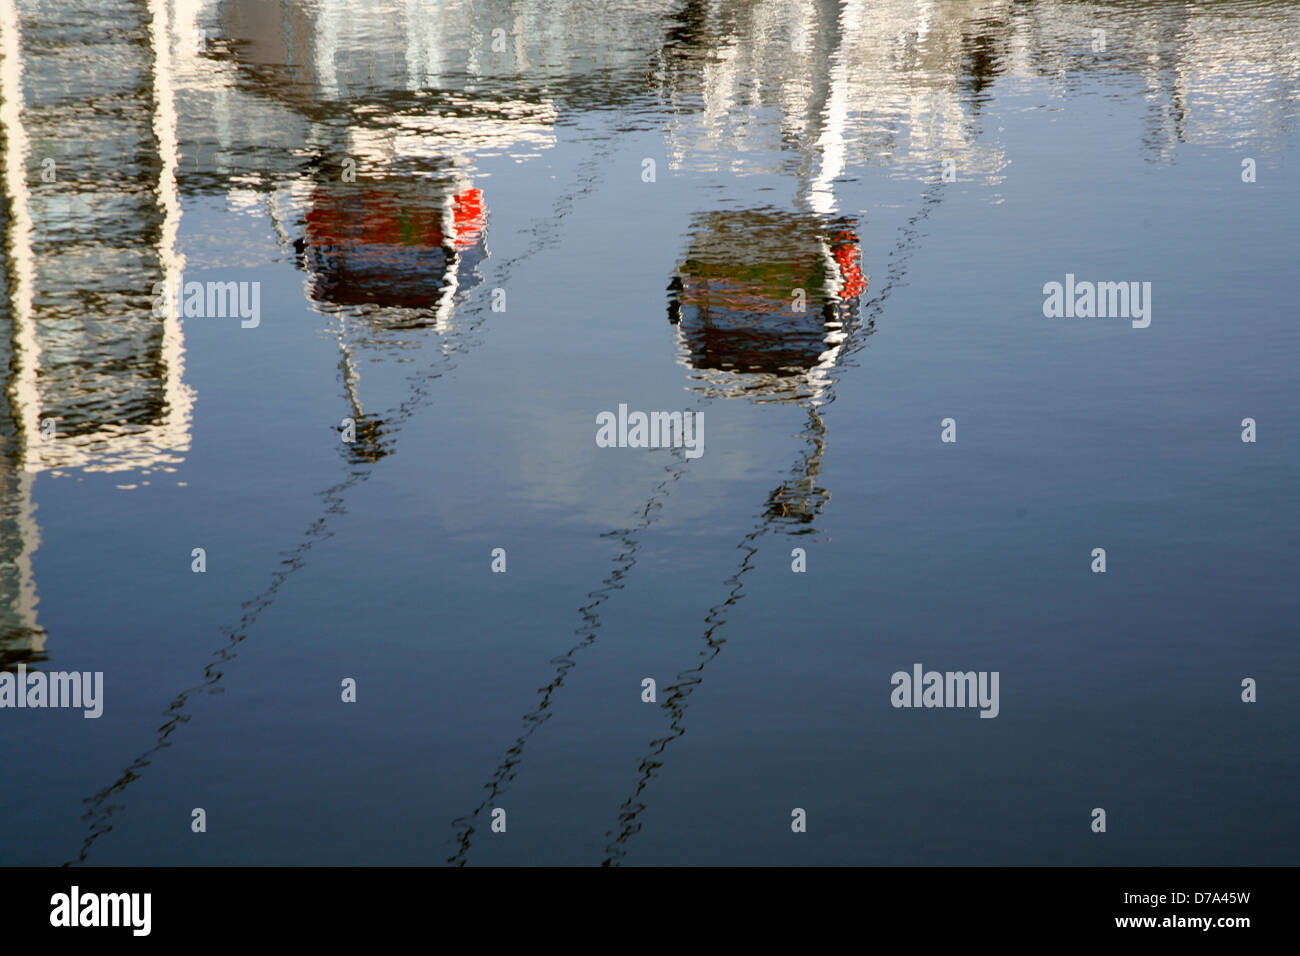 Cable cars from the Emirates Airline reflected in the water of Royal Victoria Dock, Canning Town, London, UK Stock Photo